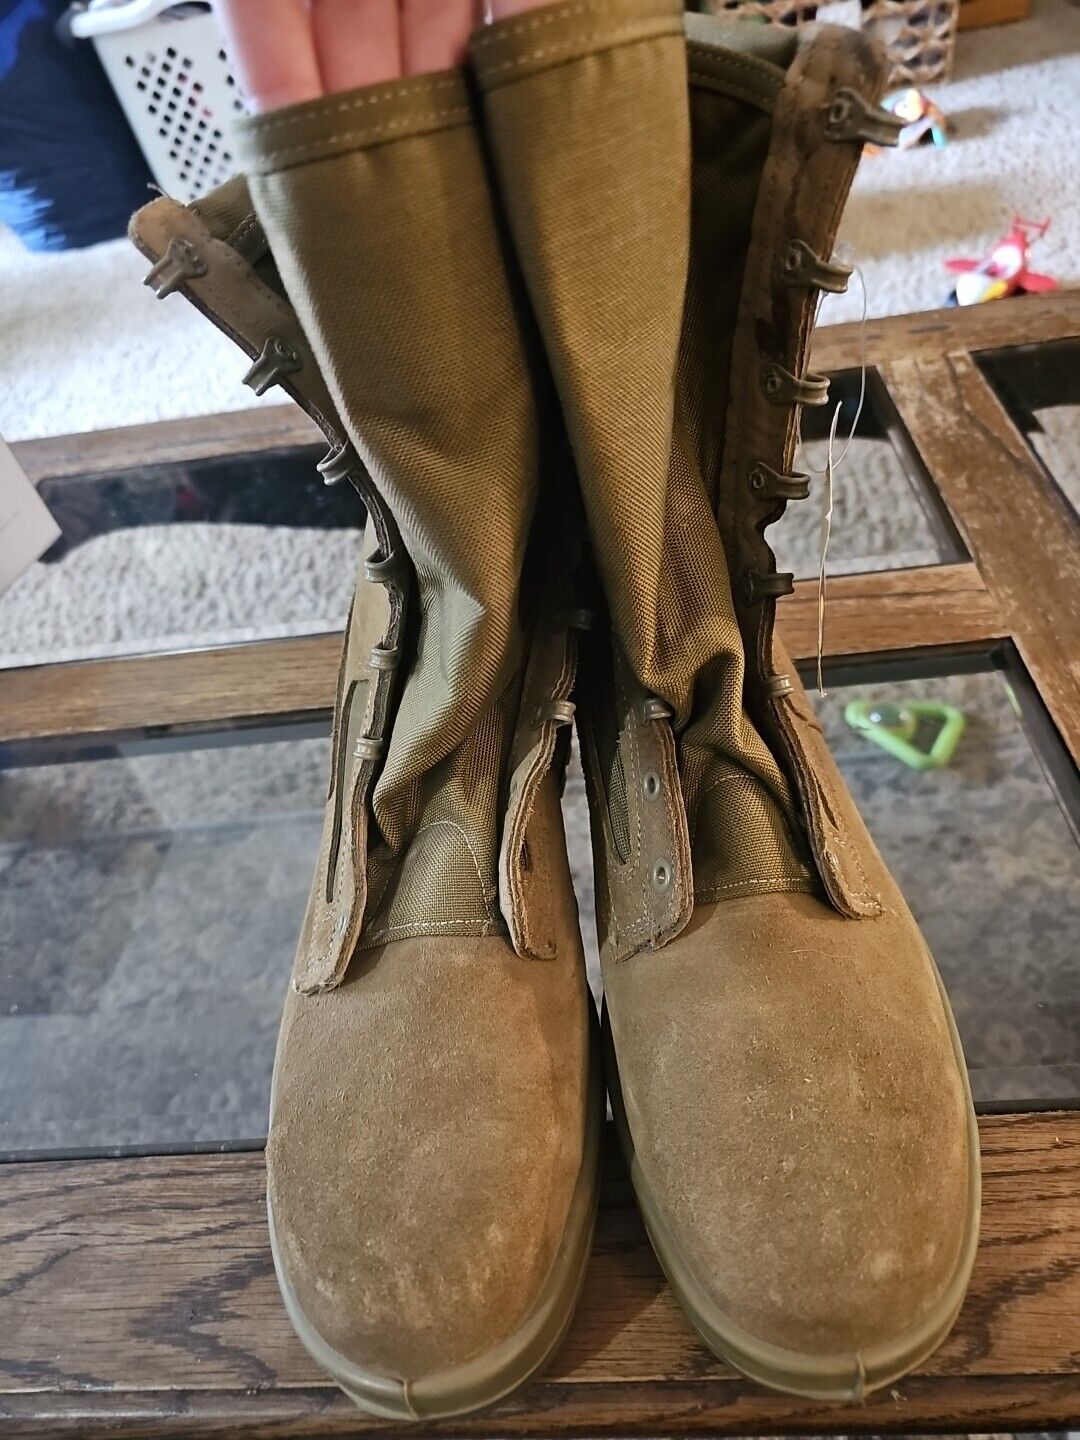 BOOTS, US ARMY Belleville Size 10.5W Never Worn